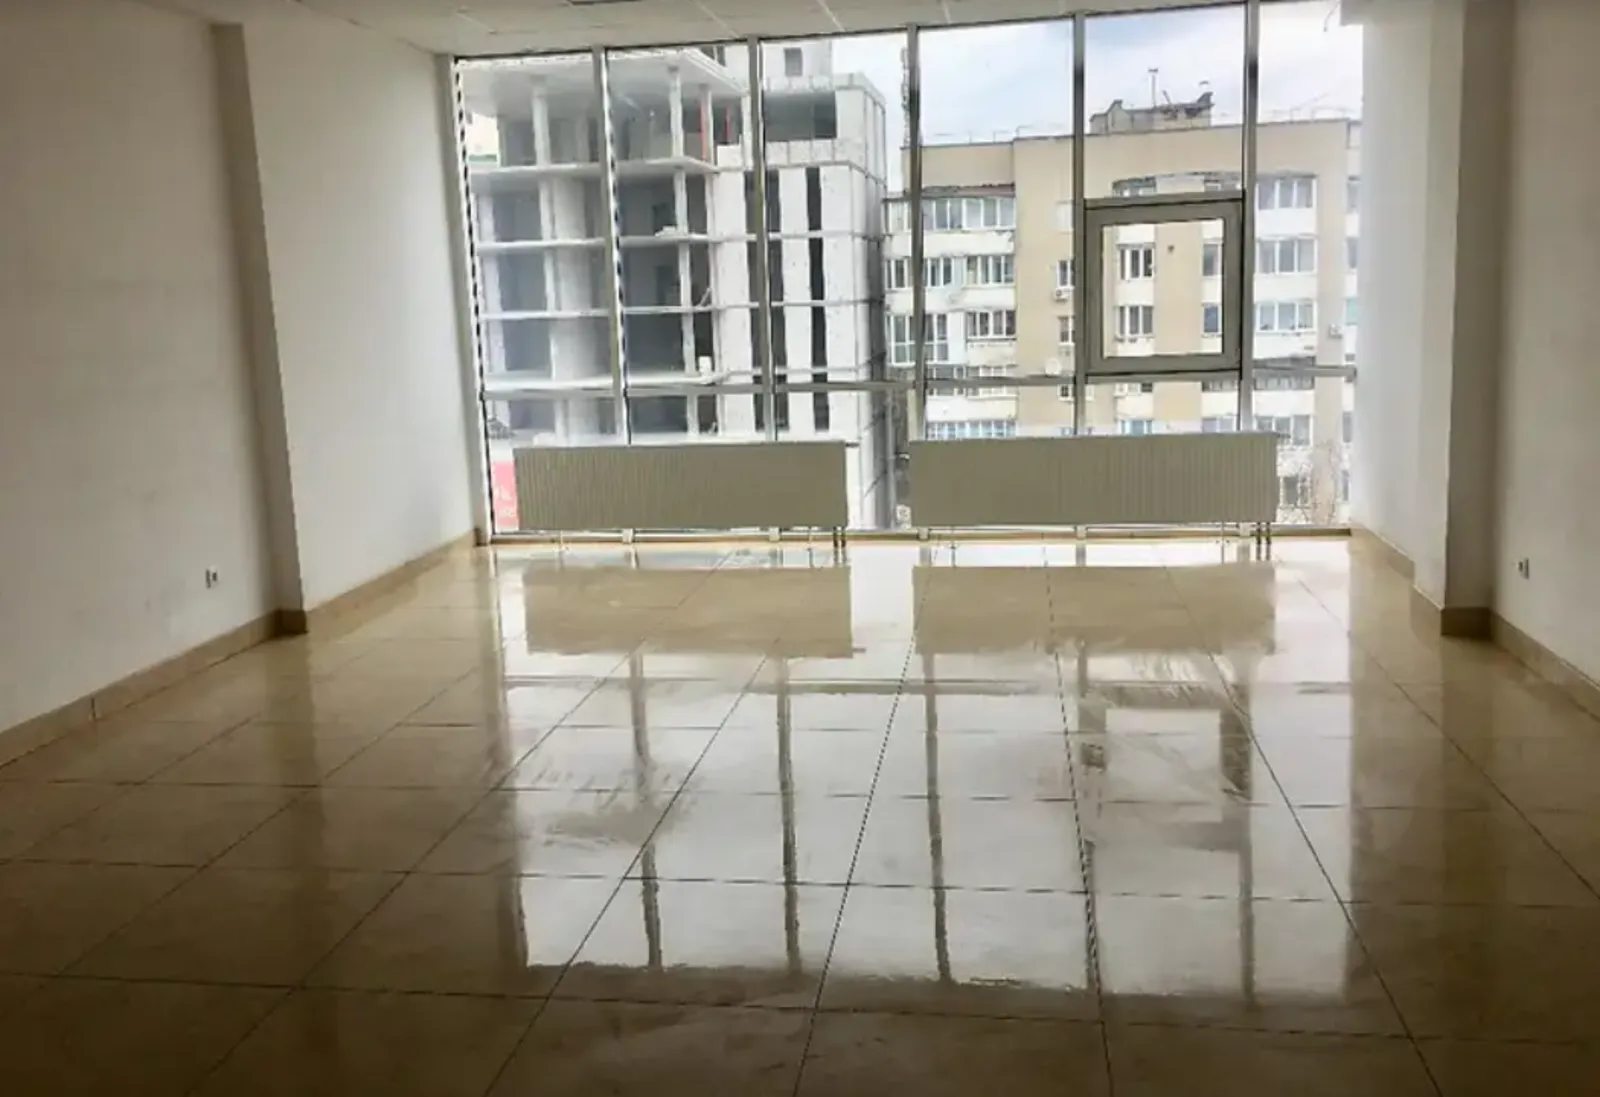 Real estate for sale for commercial purposes. 429 m², 6th floor/6 floors. Tsentr, Ternopil. 